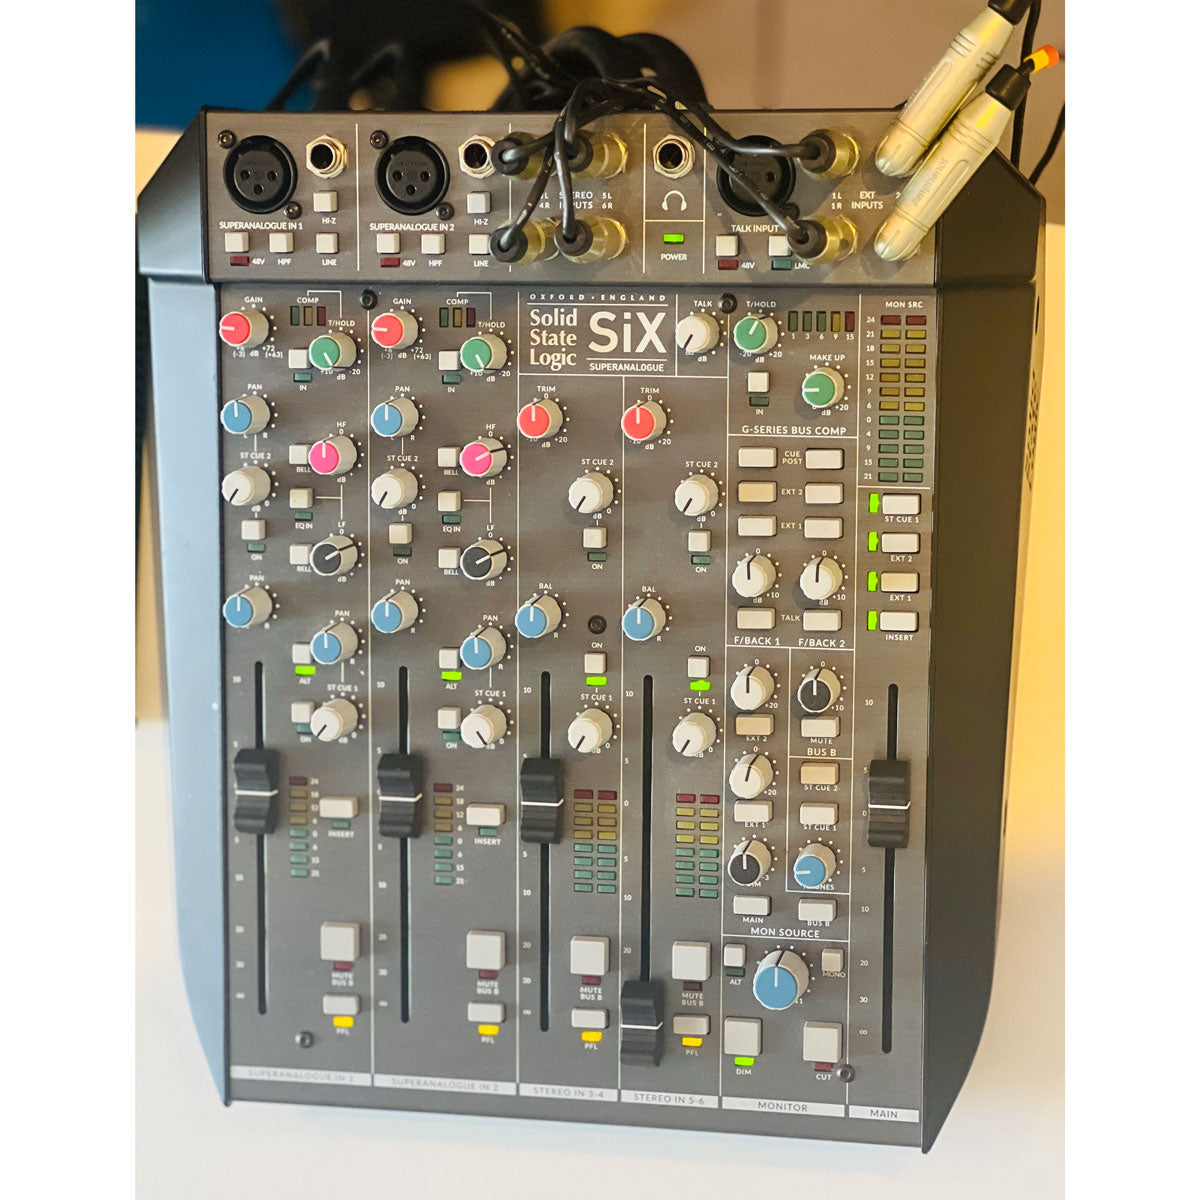 Solid State Logic SiX Desktop Mixer - Preowned